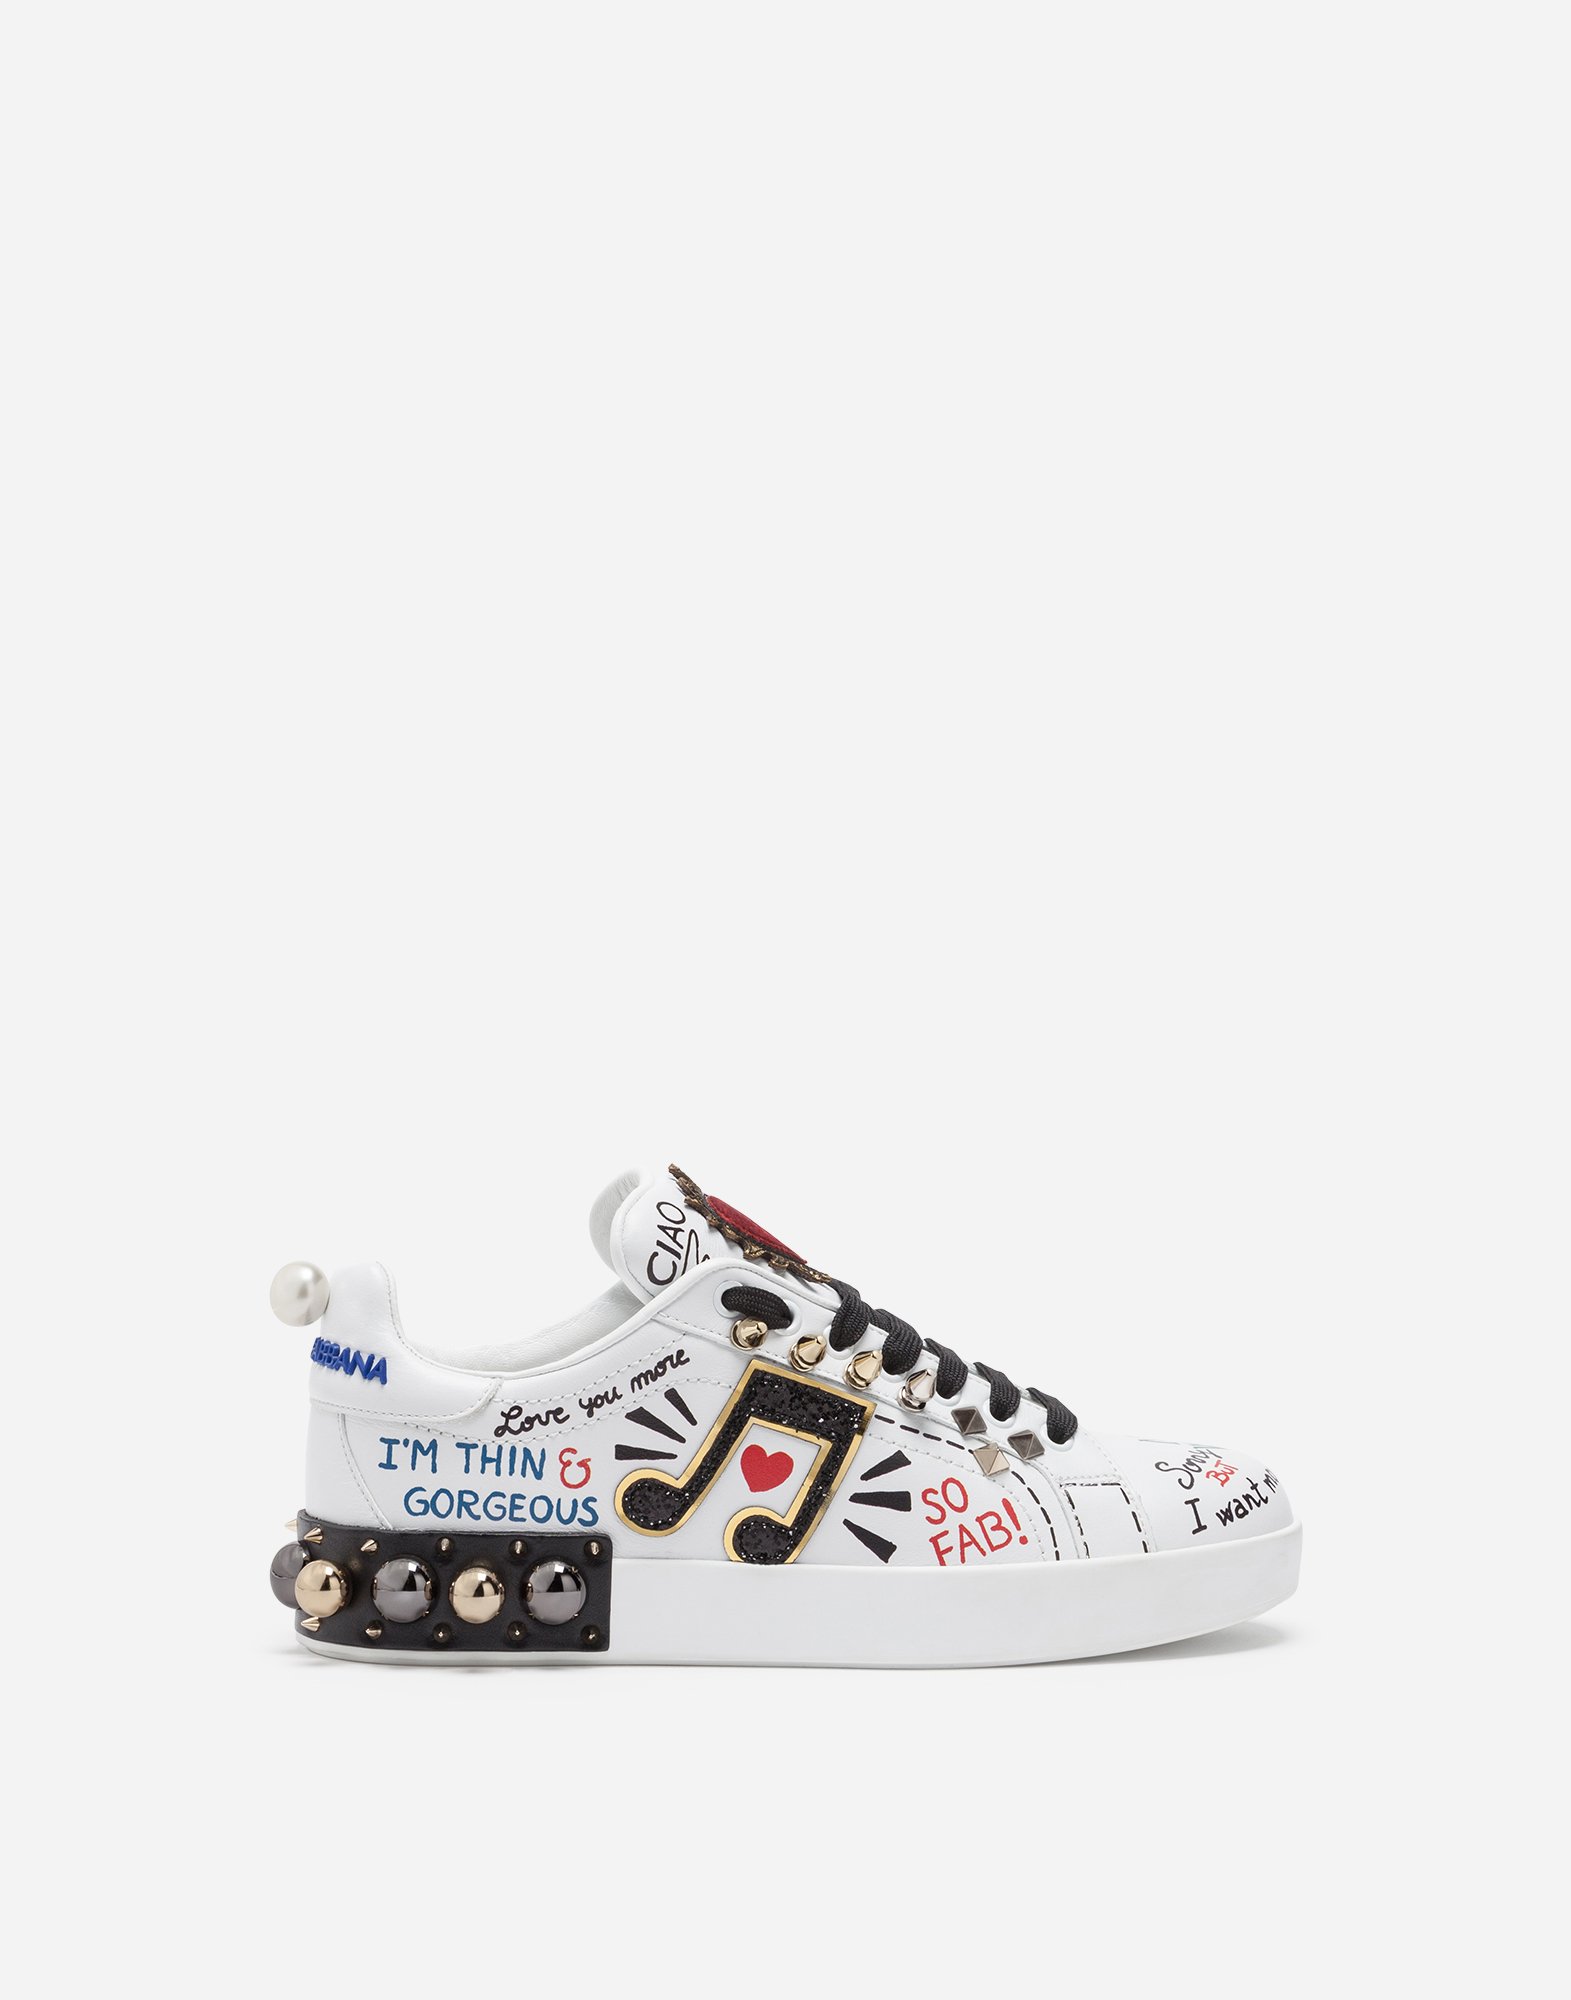 Printed calfskin nappa Portofino sneakers with patch and embroidery